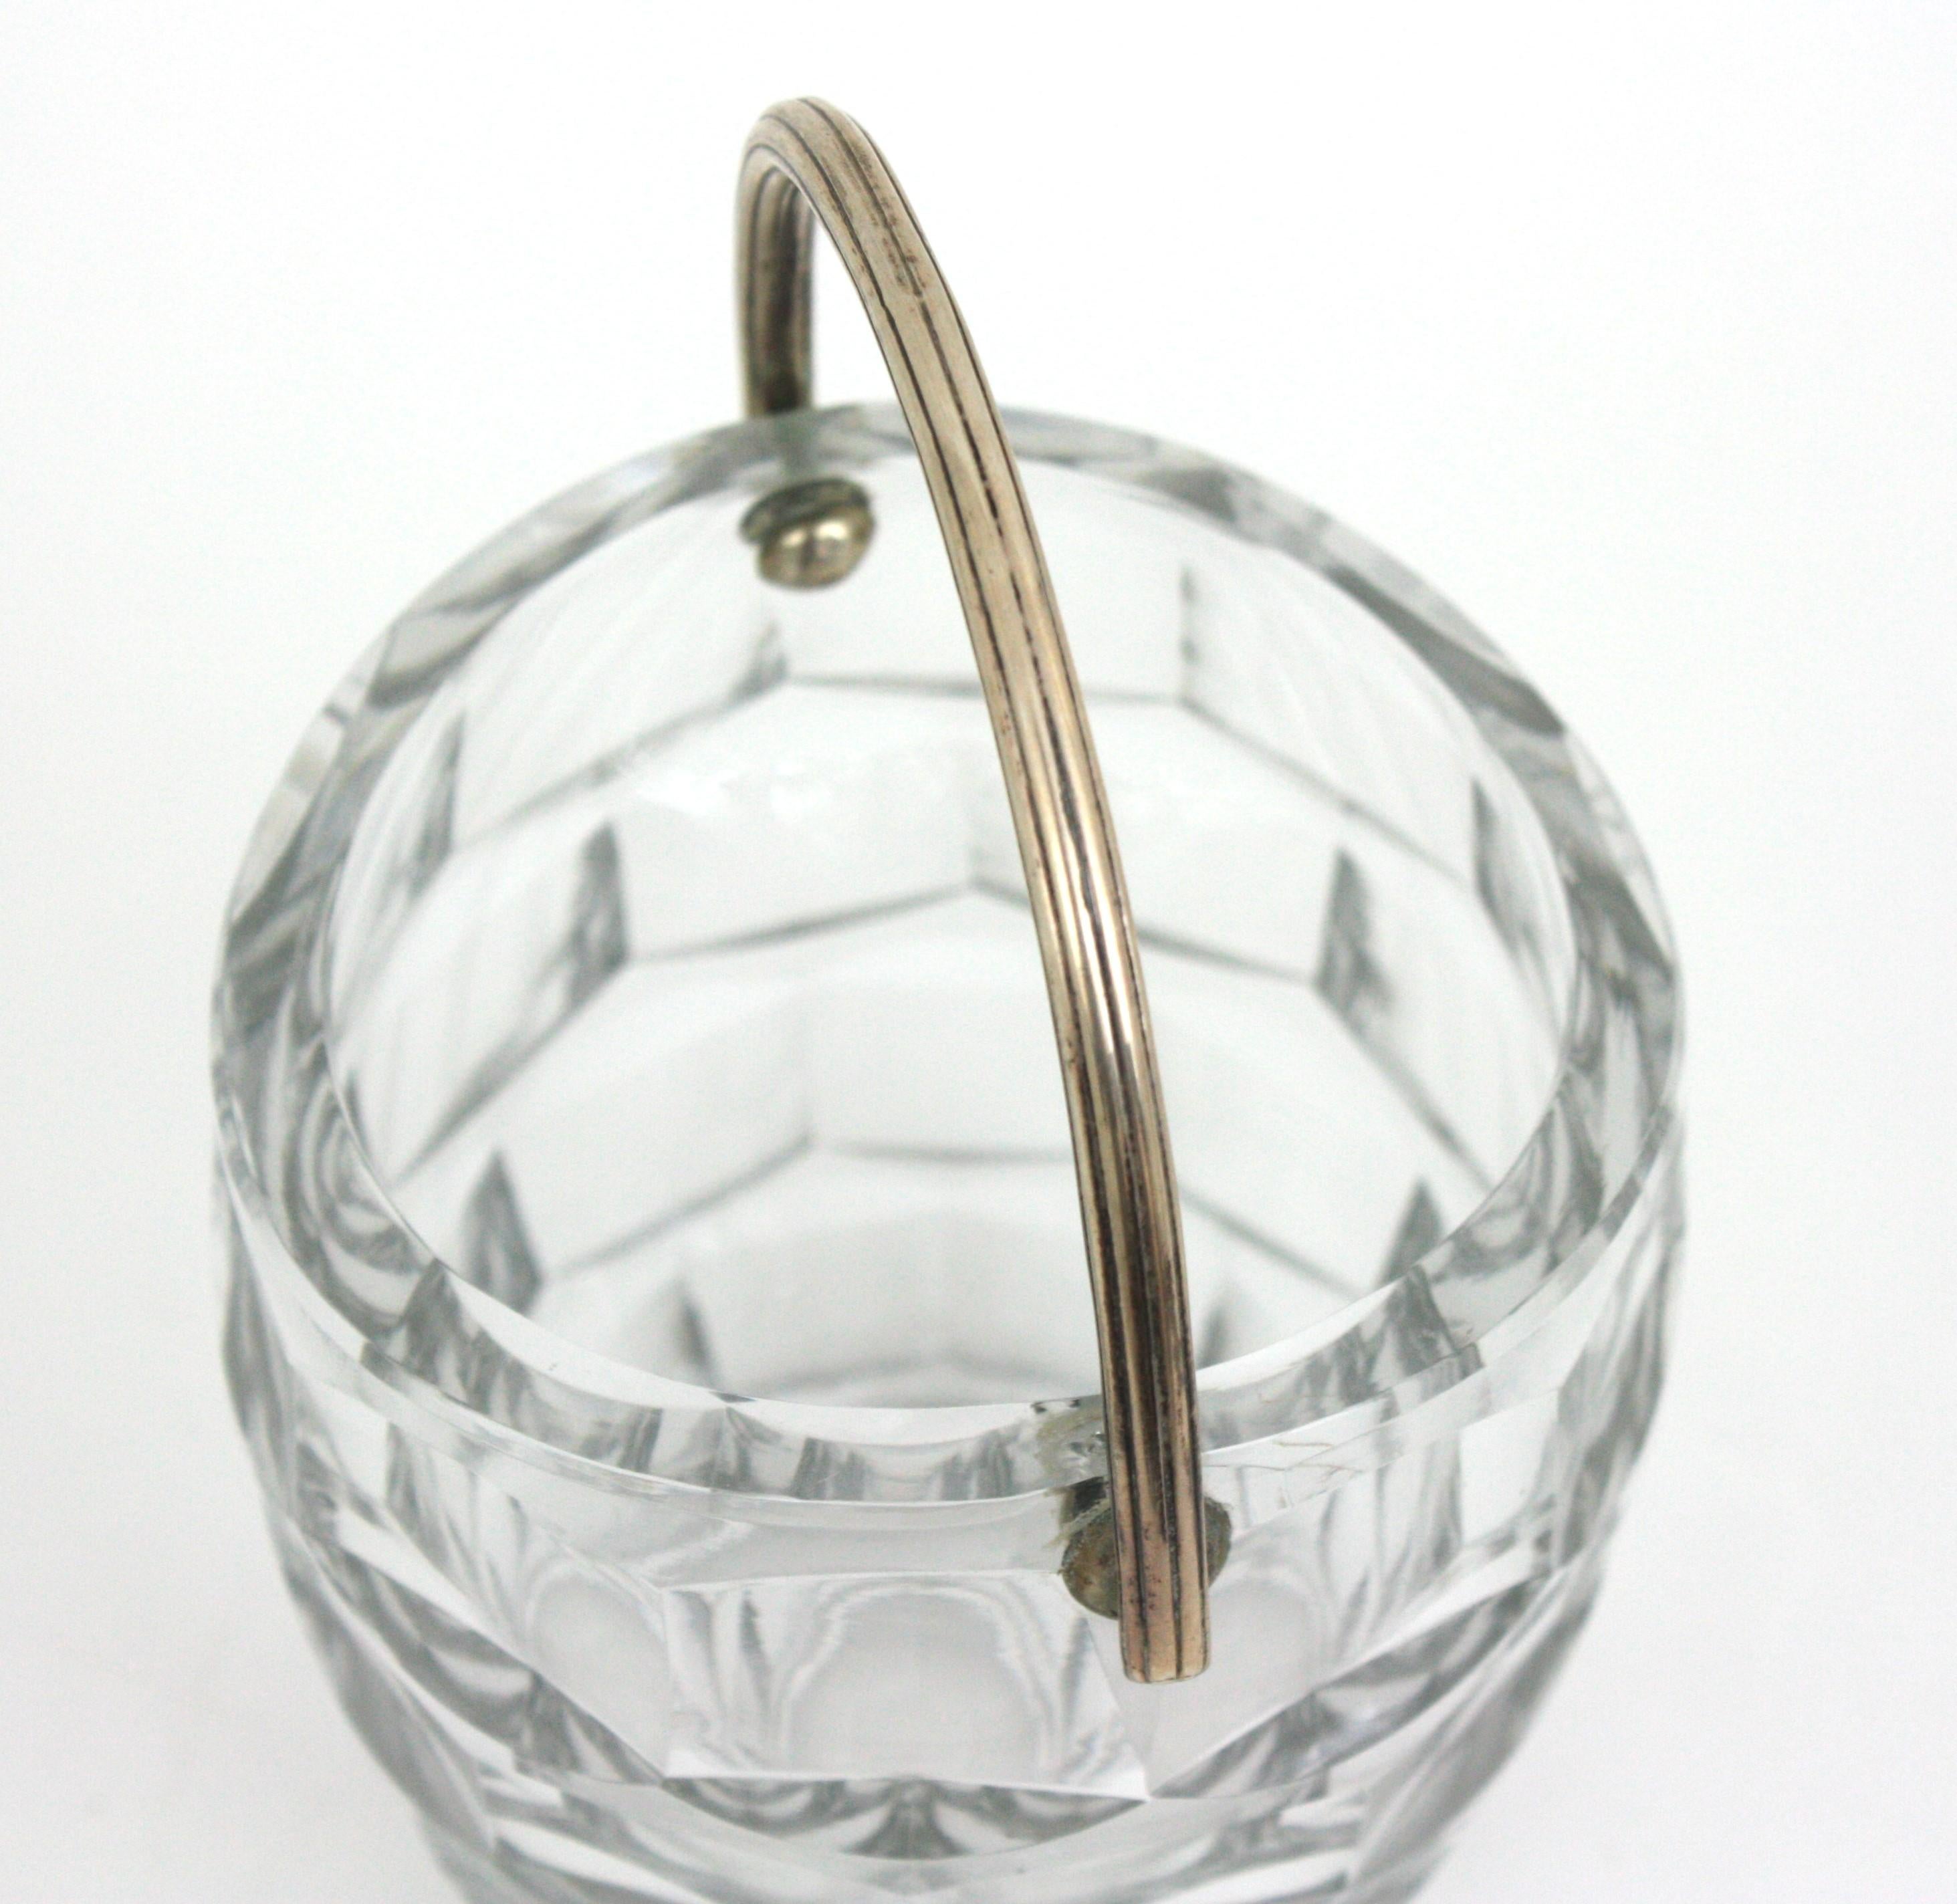 Midcentury Baccarat Cut Crystal and Silver Ice Bucket, 1950s For Sale 8